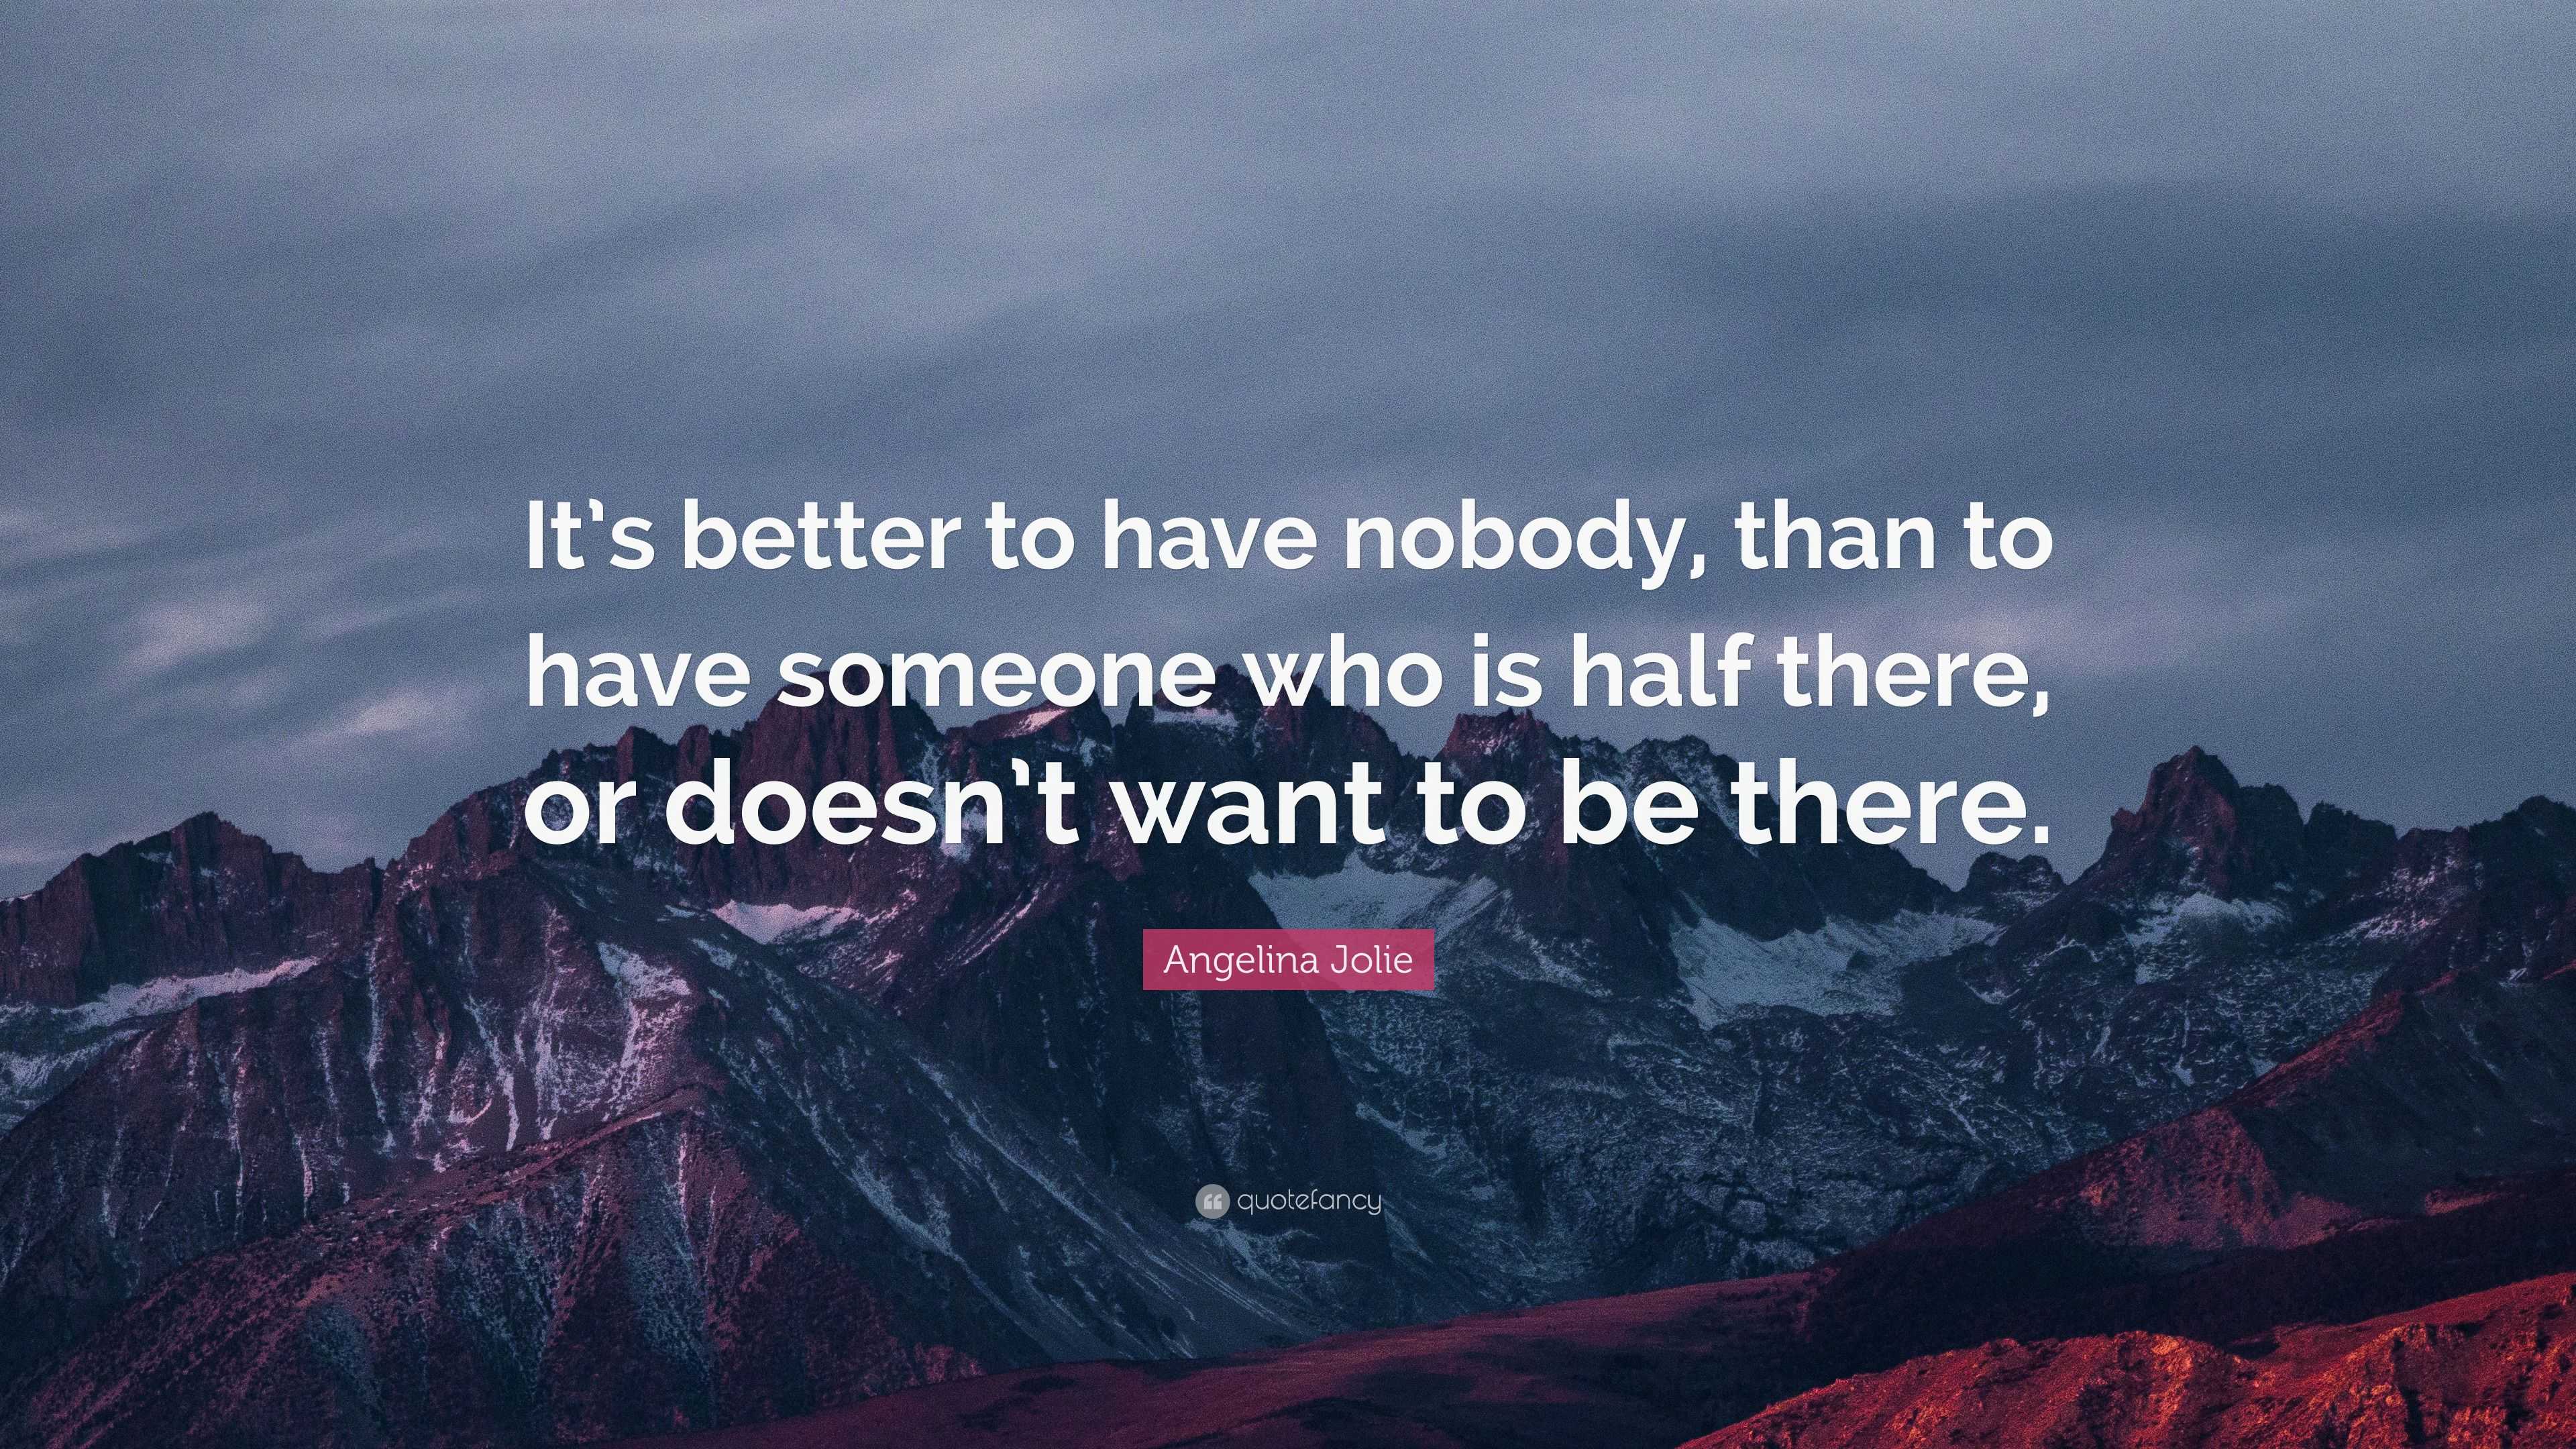 Angelina Jolie Quote: “It’s better to have nobody, than to have someone ...